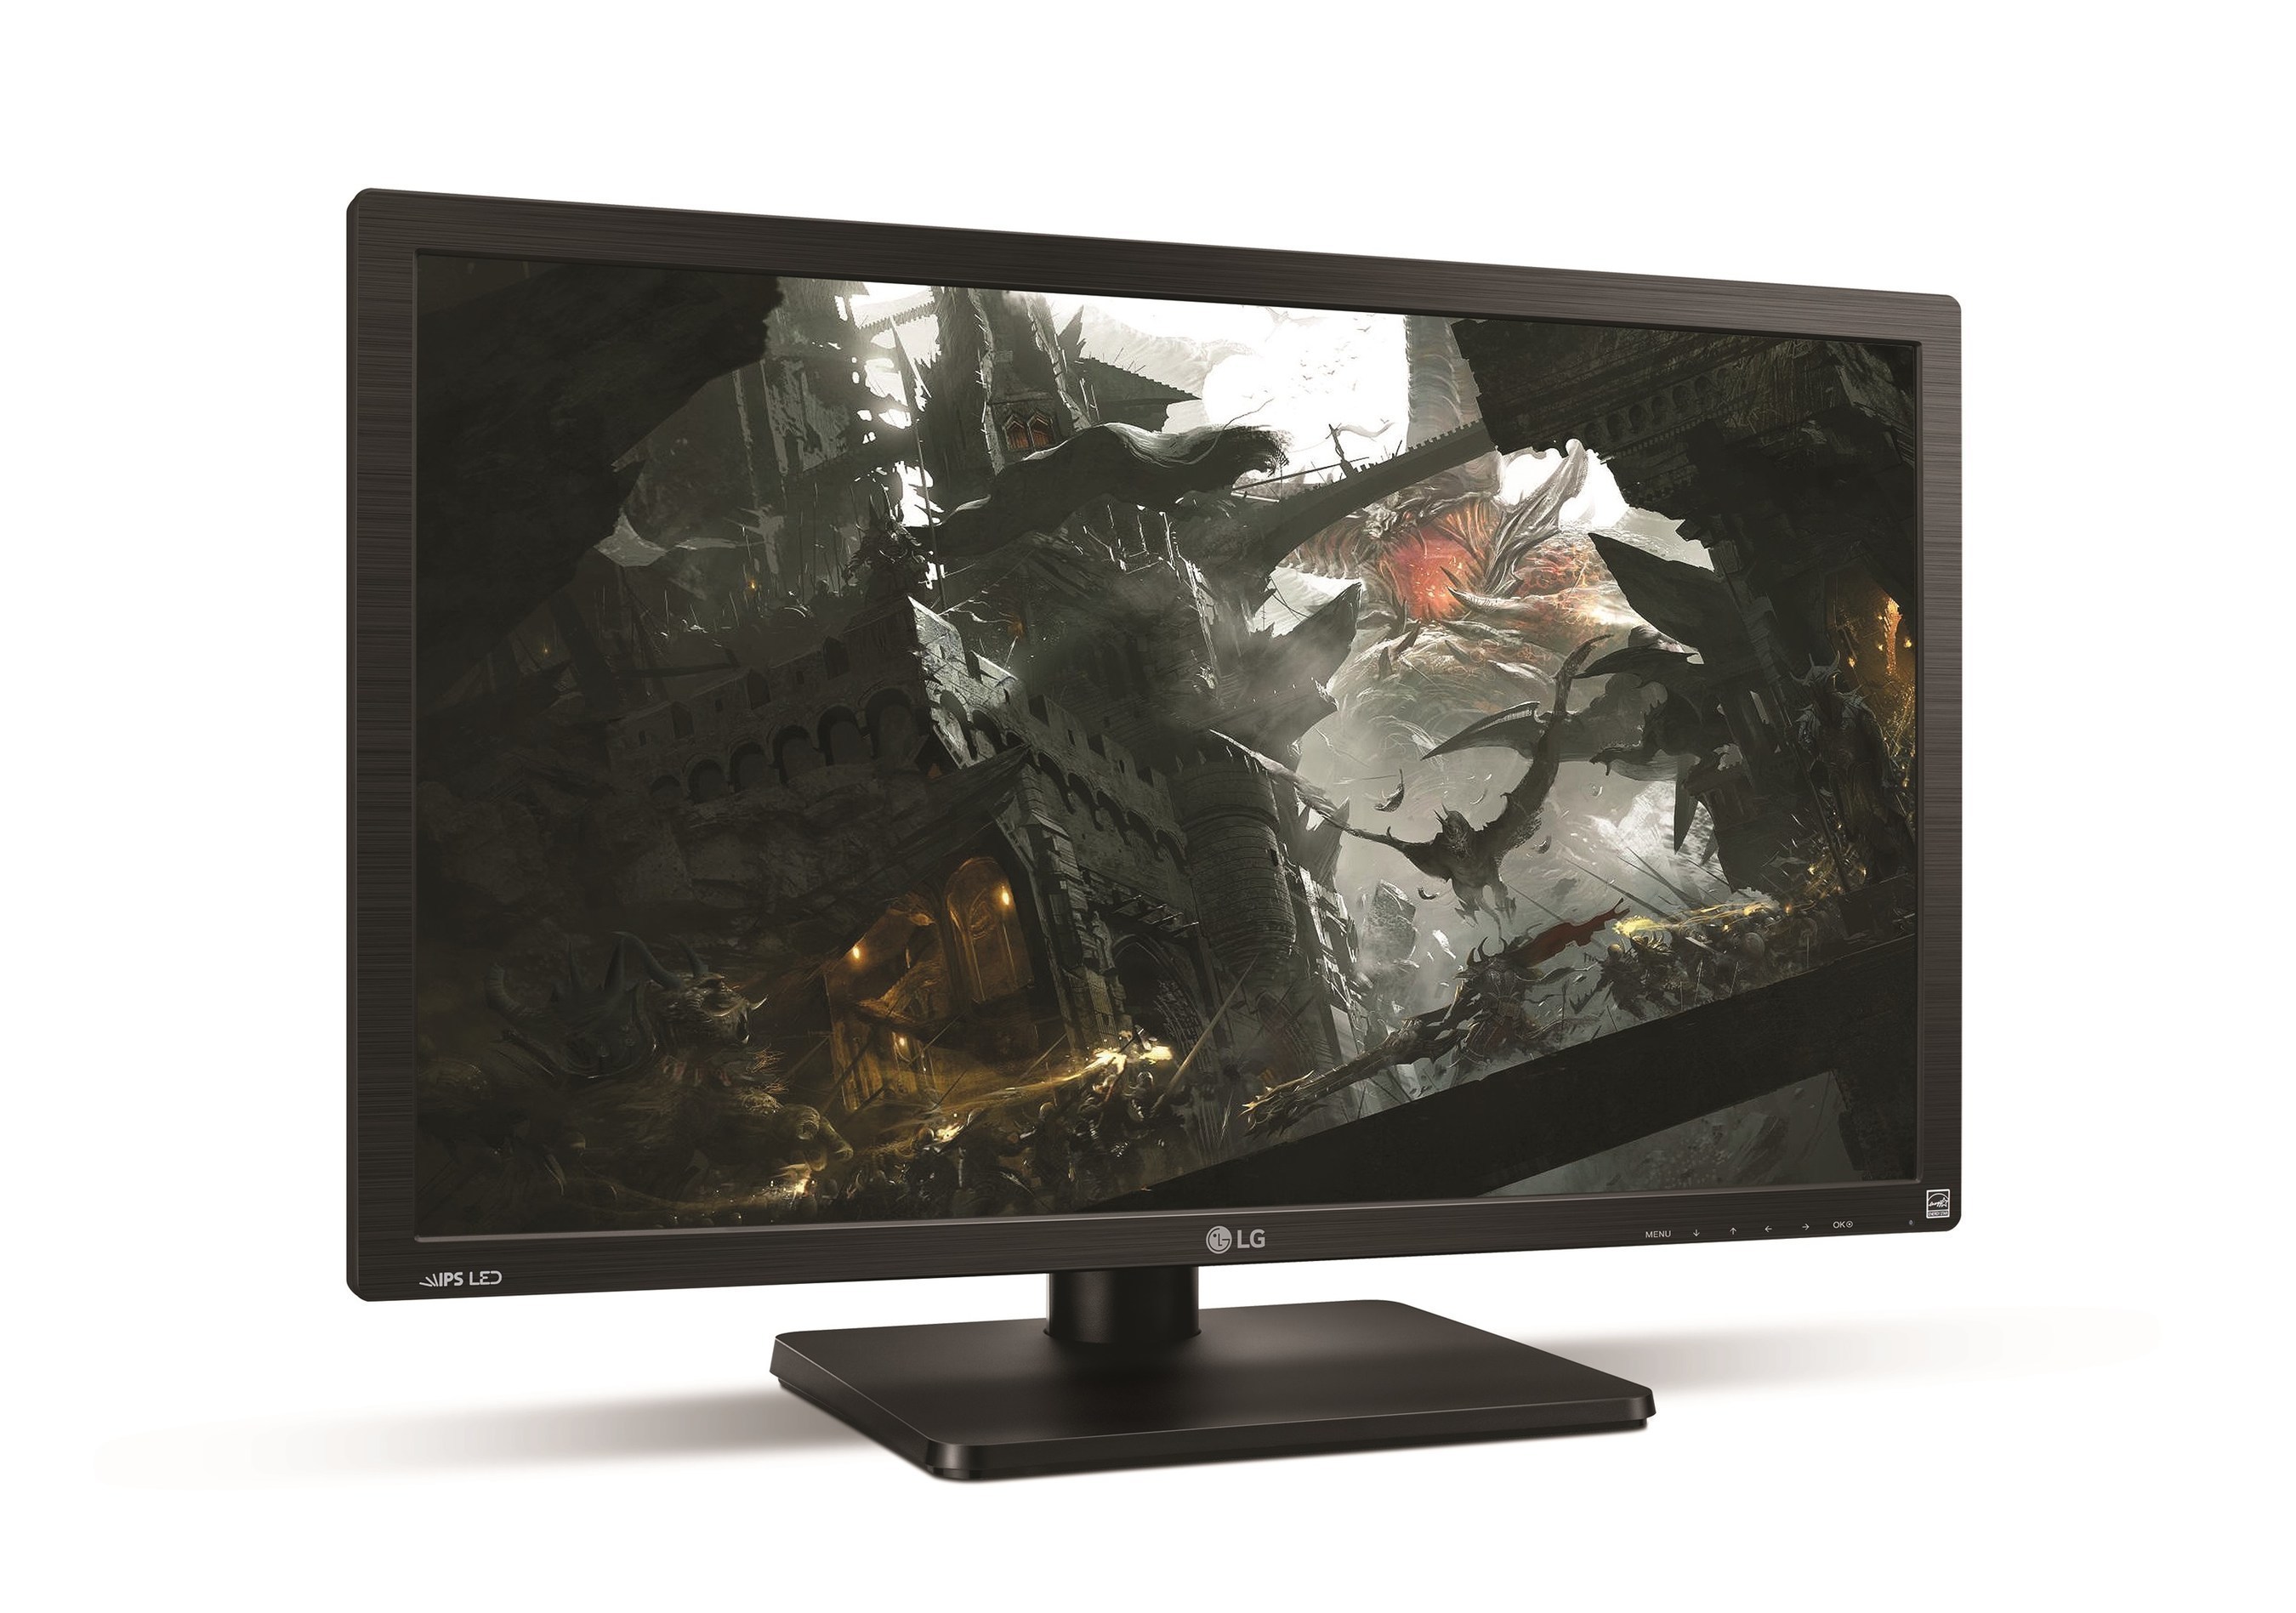 The new LG 4K ULTRA HD monitor (model 27MU67) is specifically designed to provide a premium gaming experience, boasting a large viewing area and a 3840 x 2160 screen resolution for an eye-popping level of 4K visual detail.